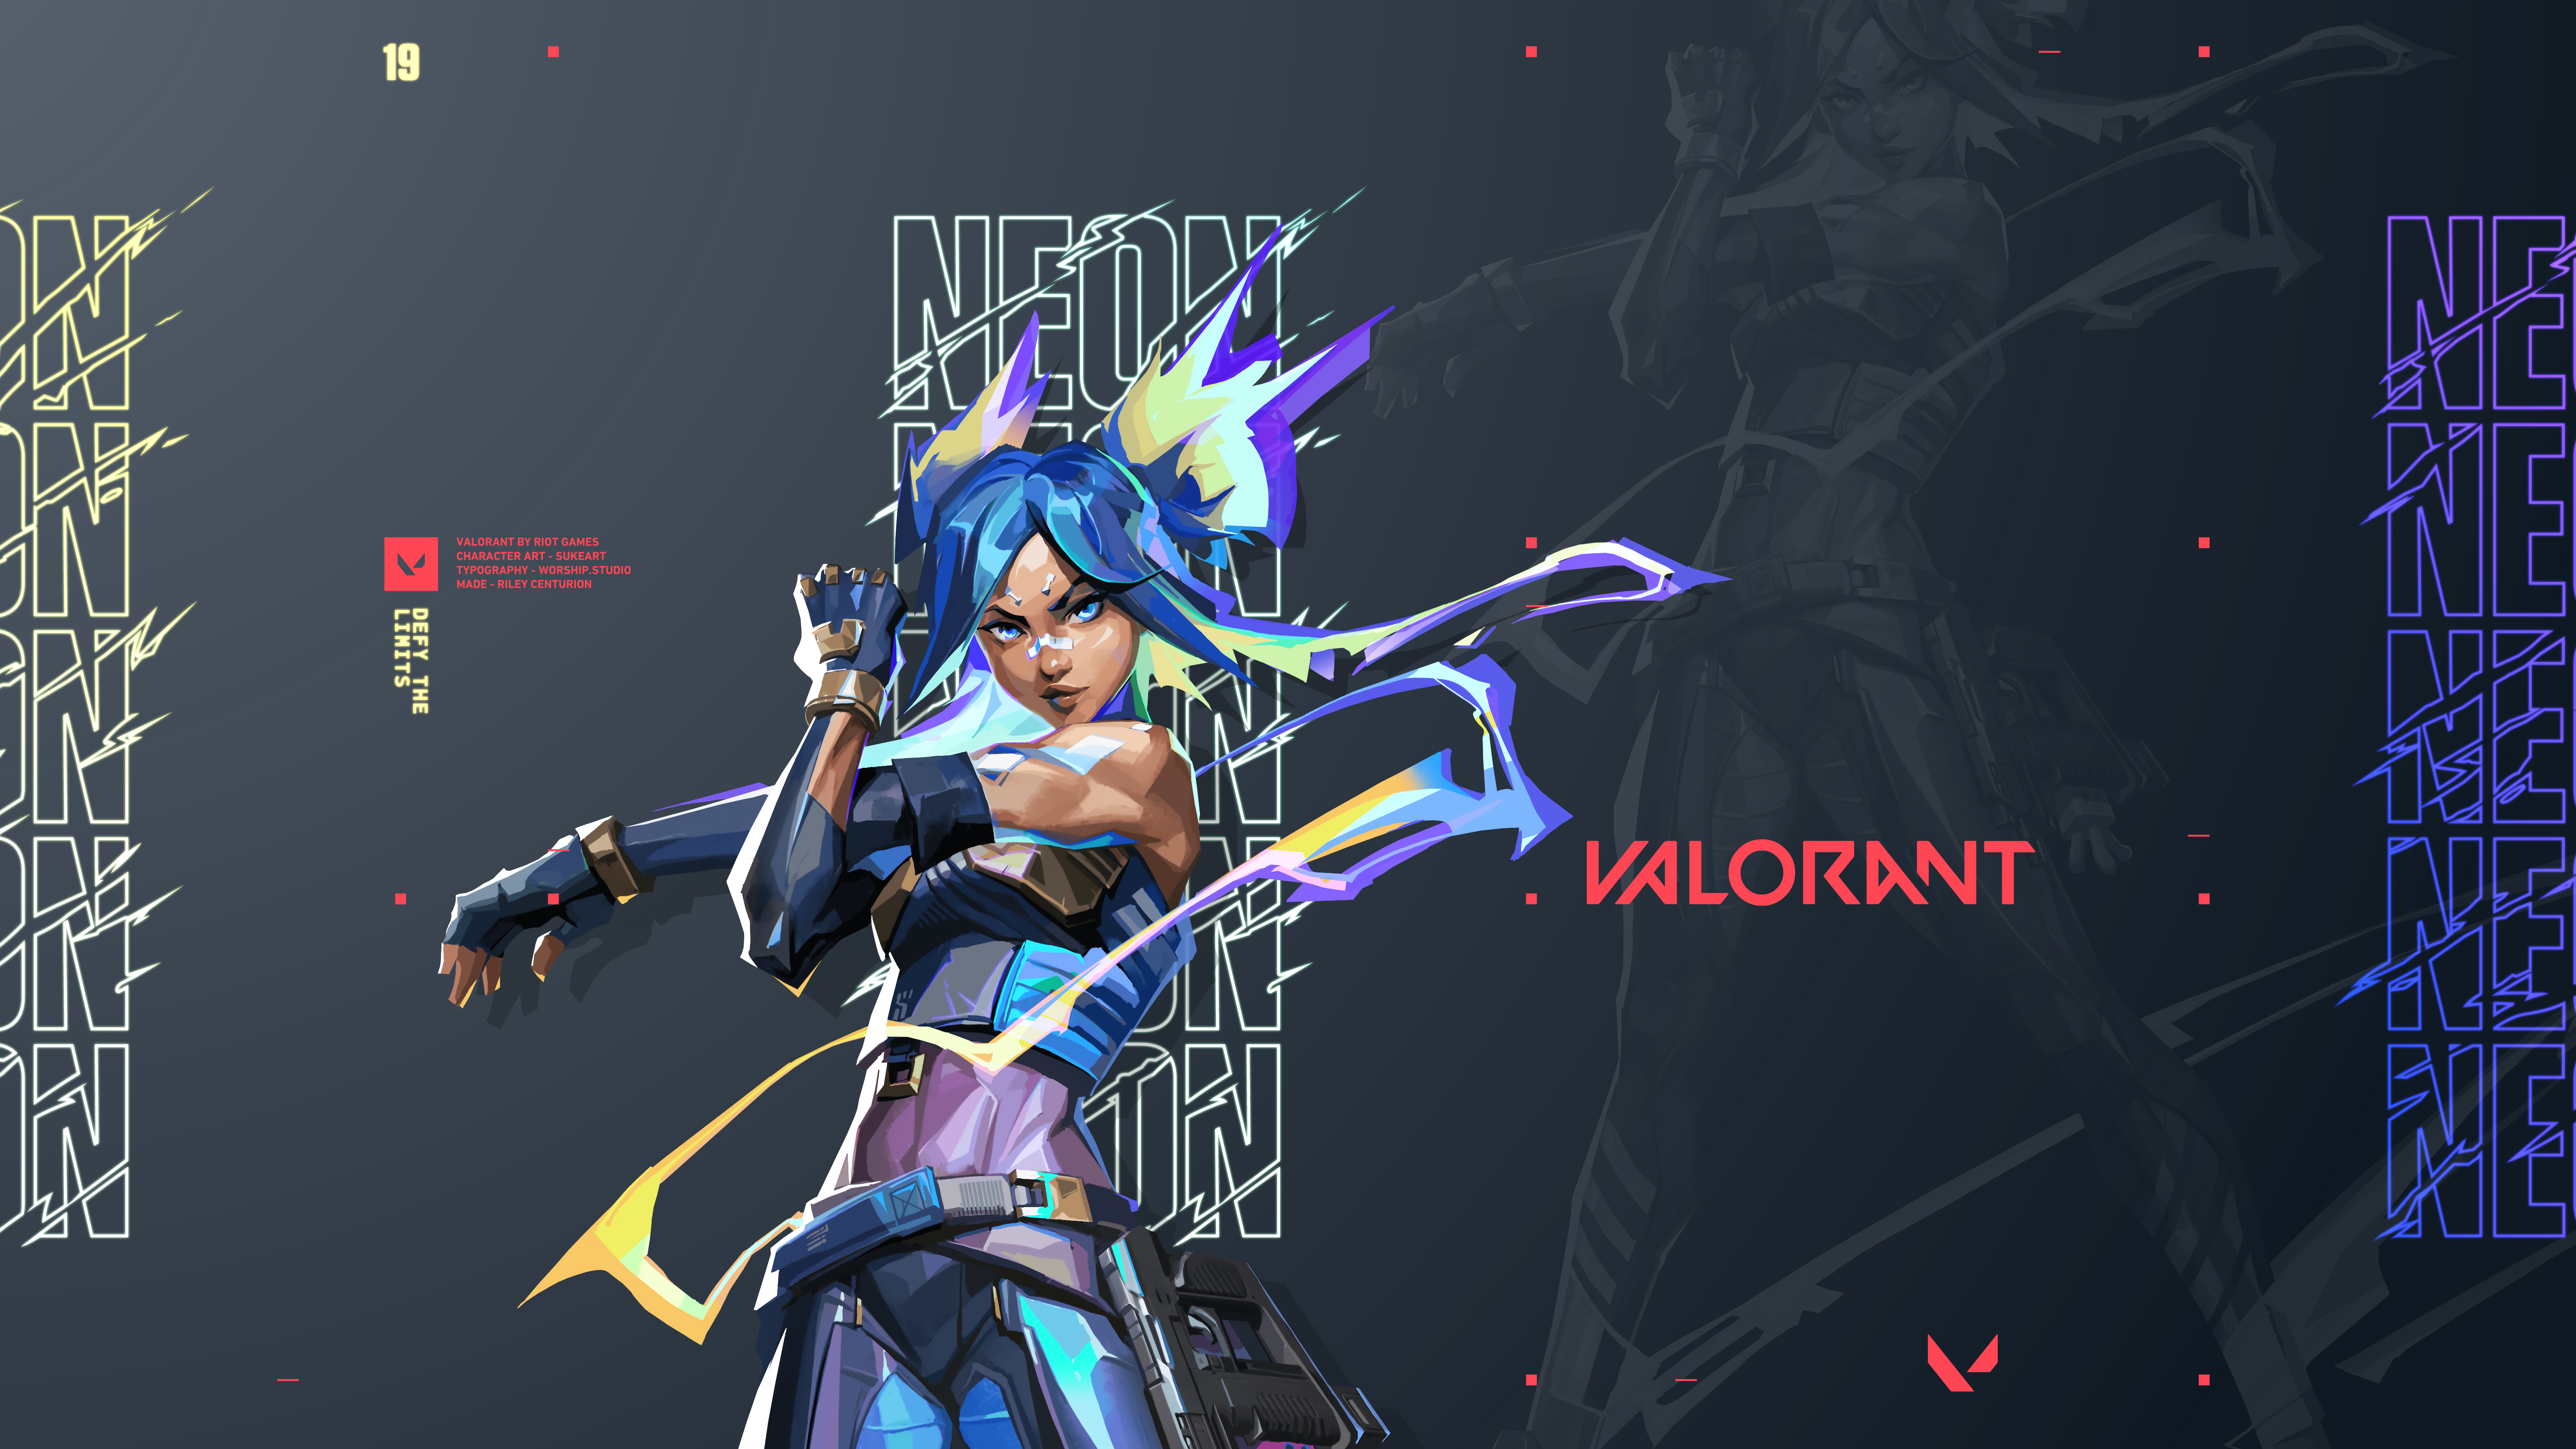 Cool Valorant Neon 2020 Wallpapers